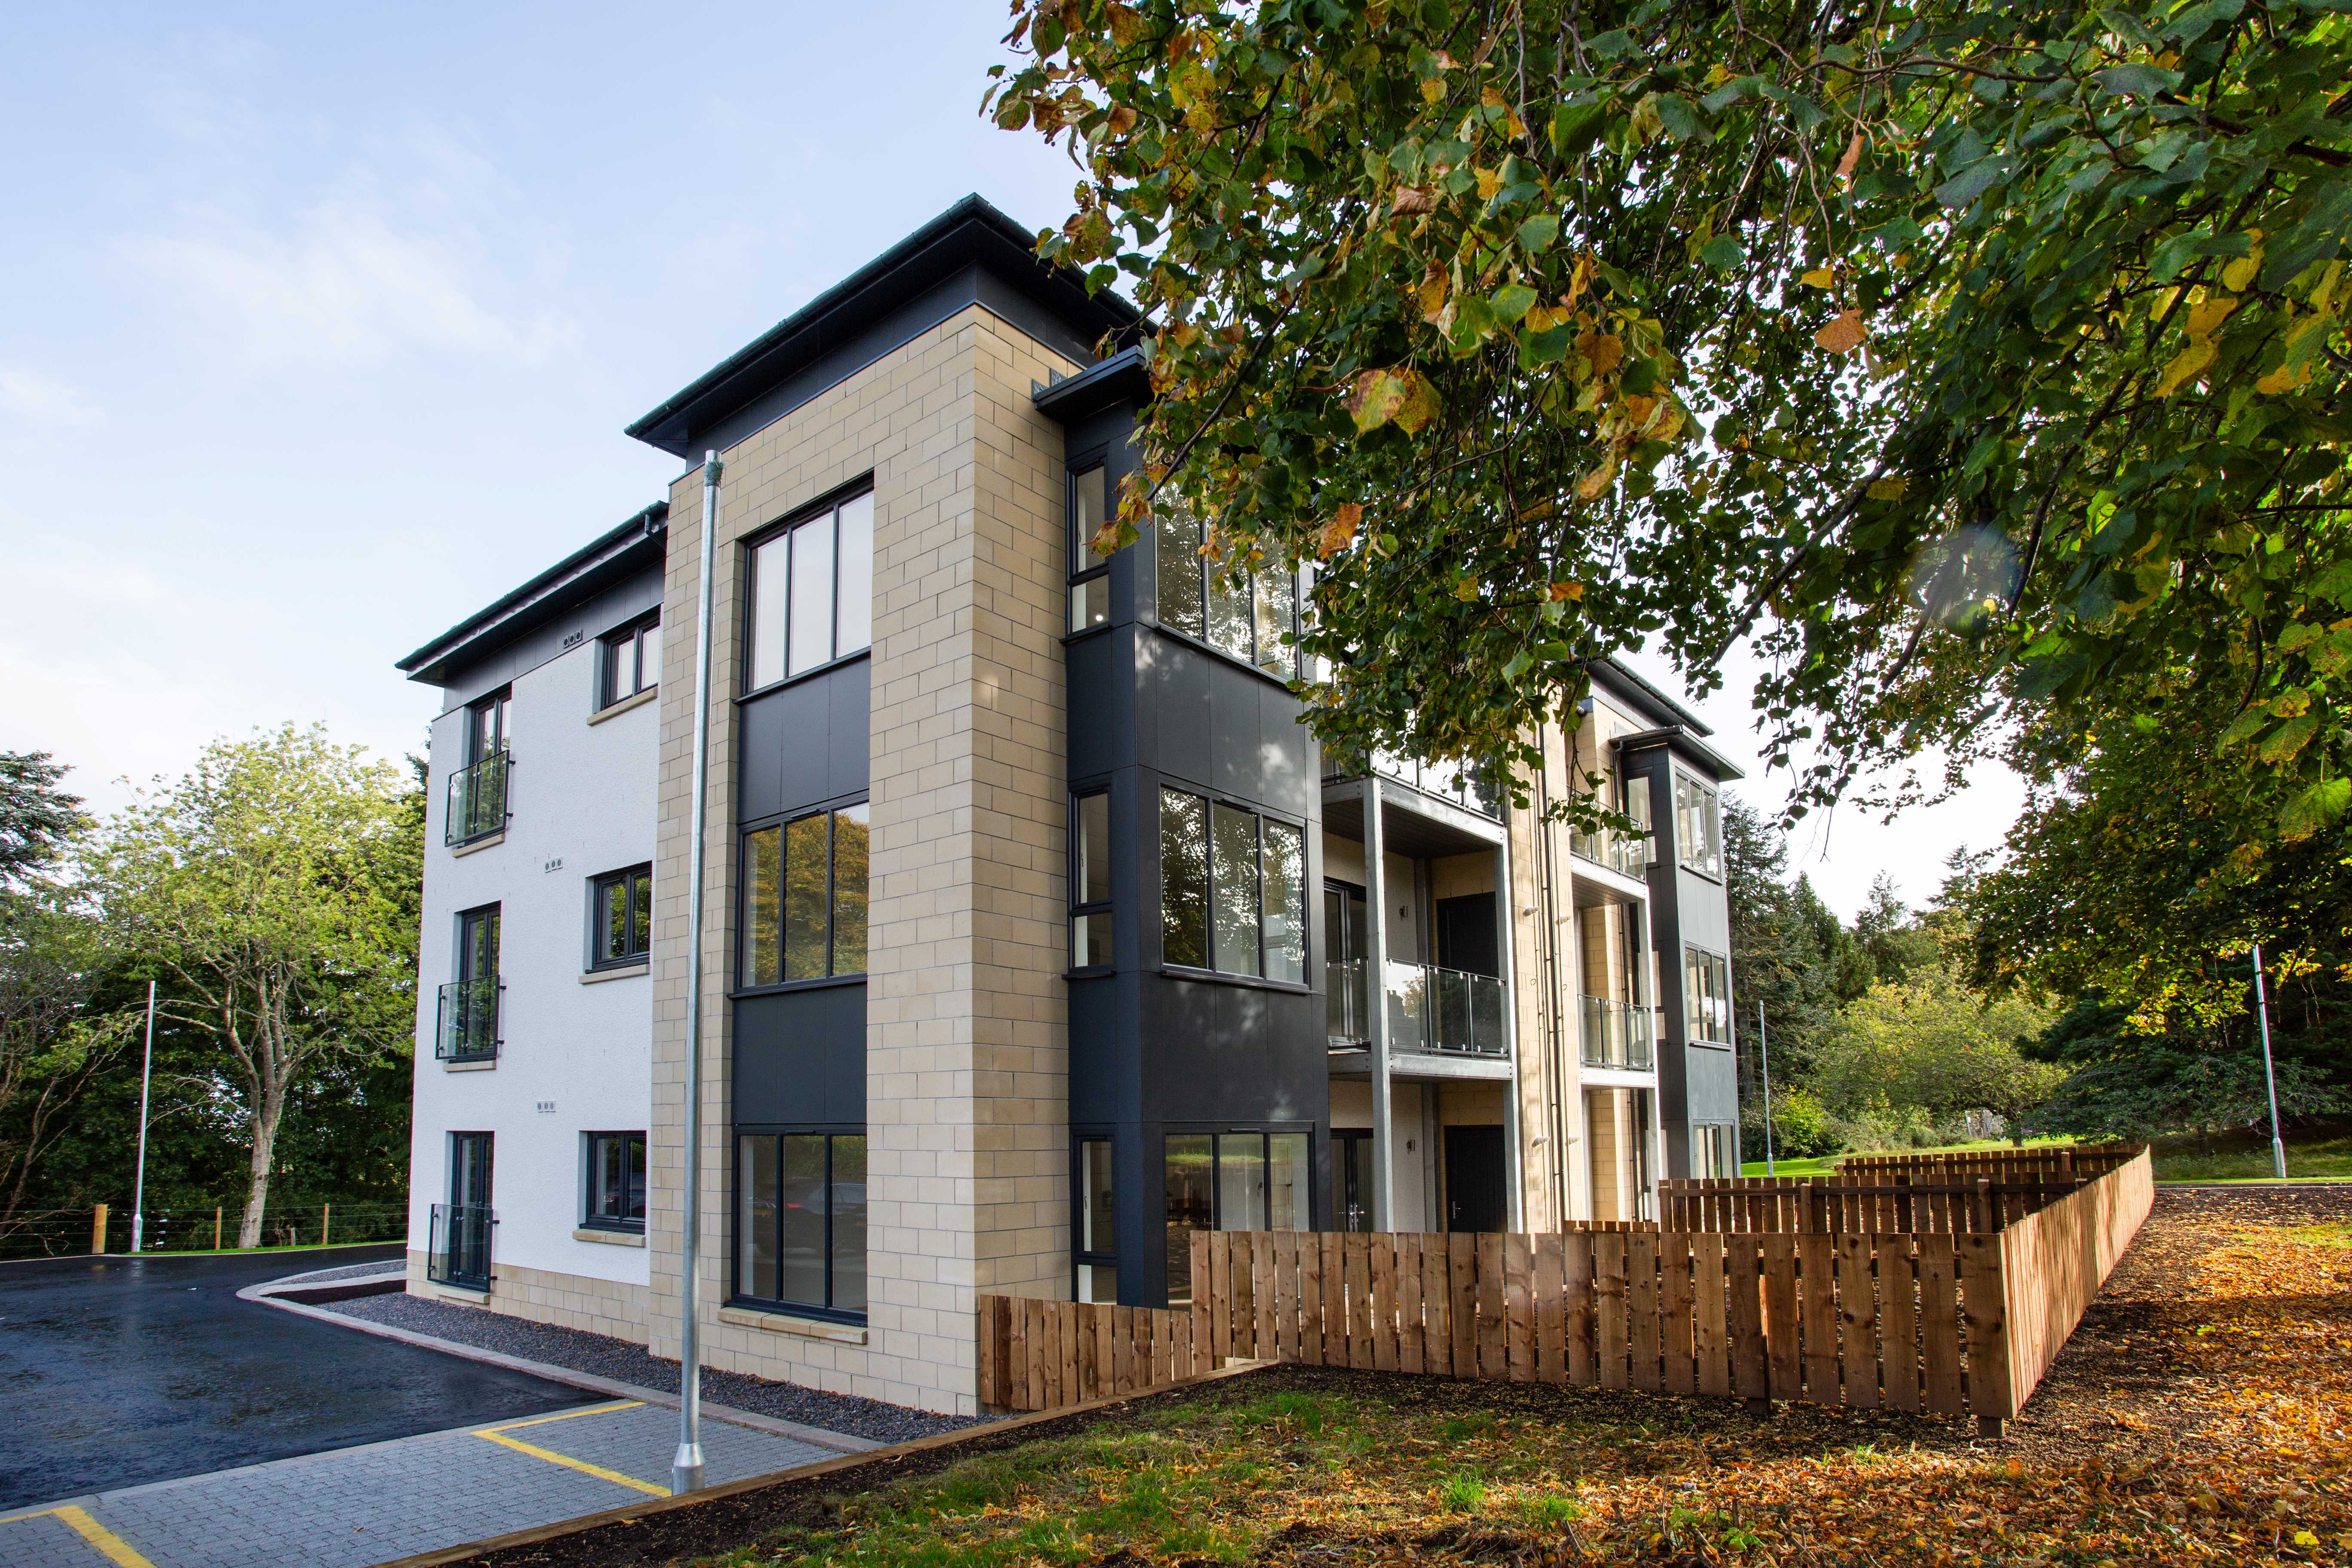 Tulloch Homes bags two UK award wins with £12m Drummond Hill development